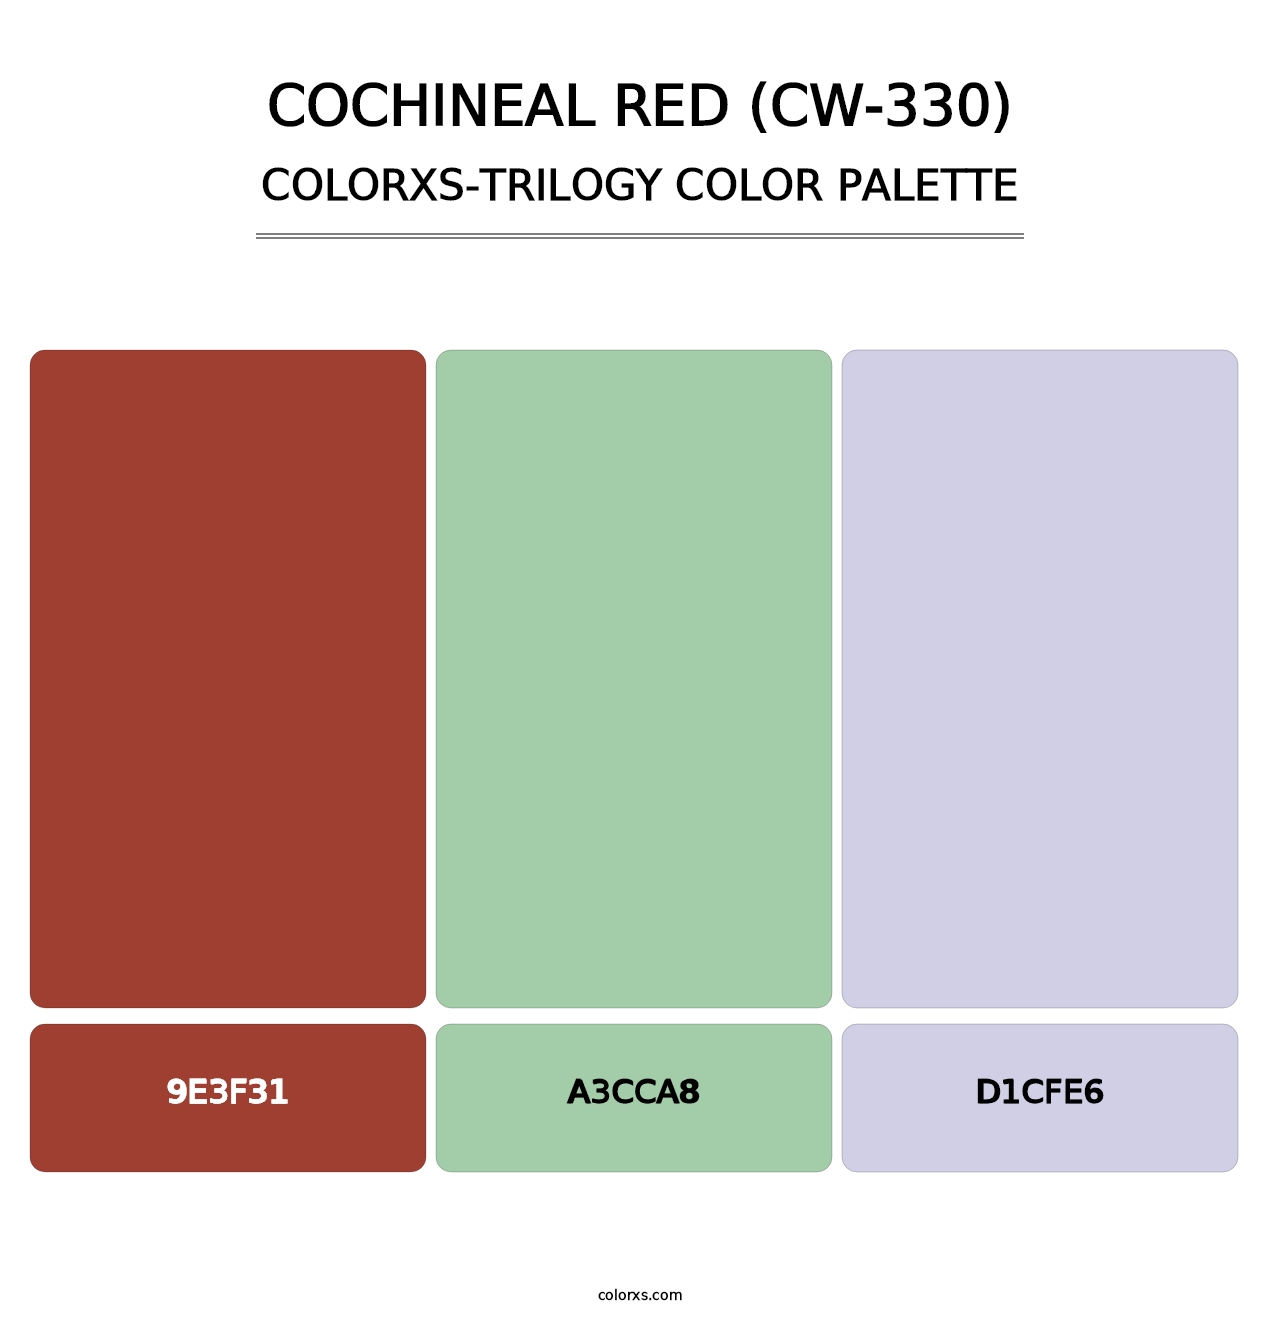 Cochineal Red (CW-330) - Colorxs Trilogy Palette